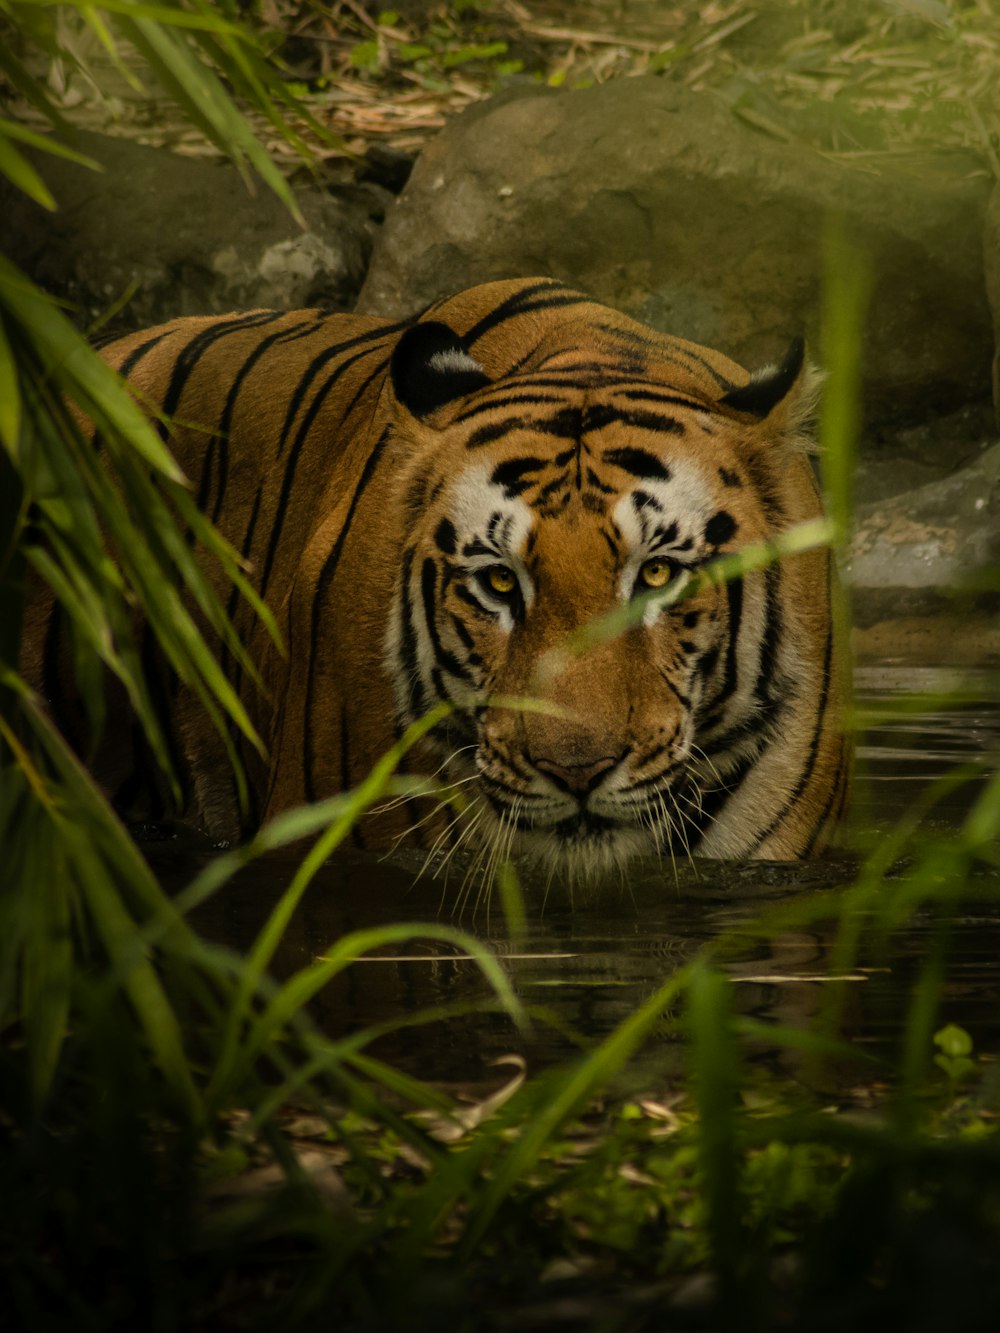 a tiger walking through a body of water